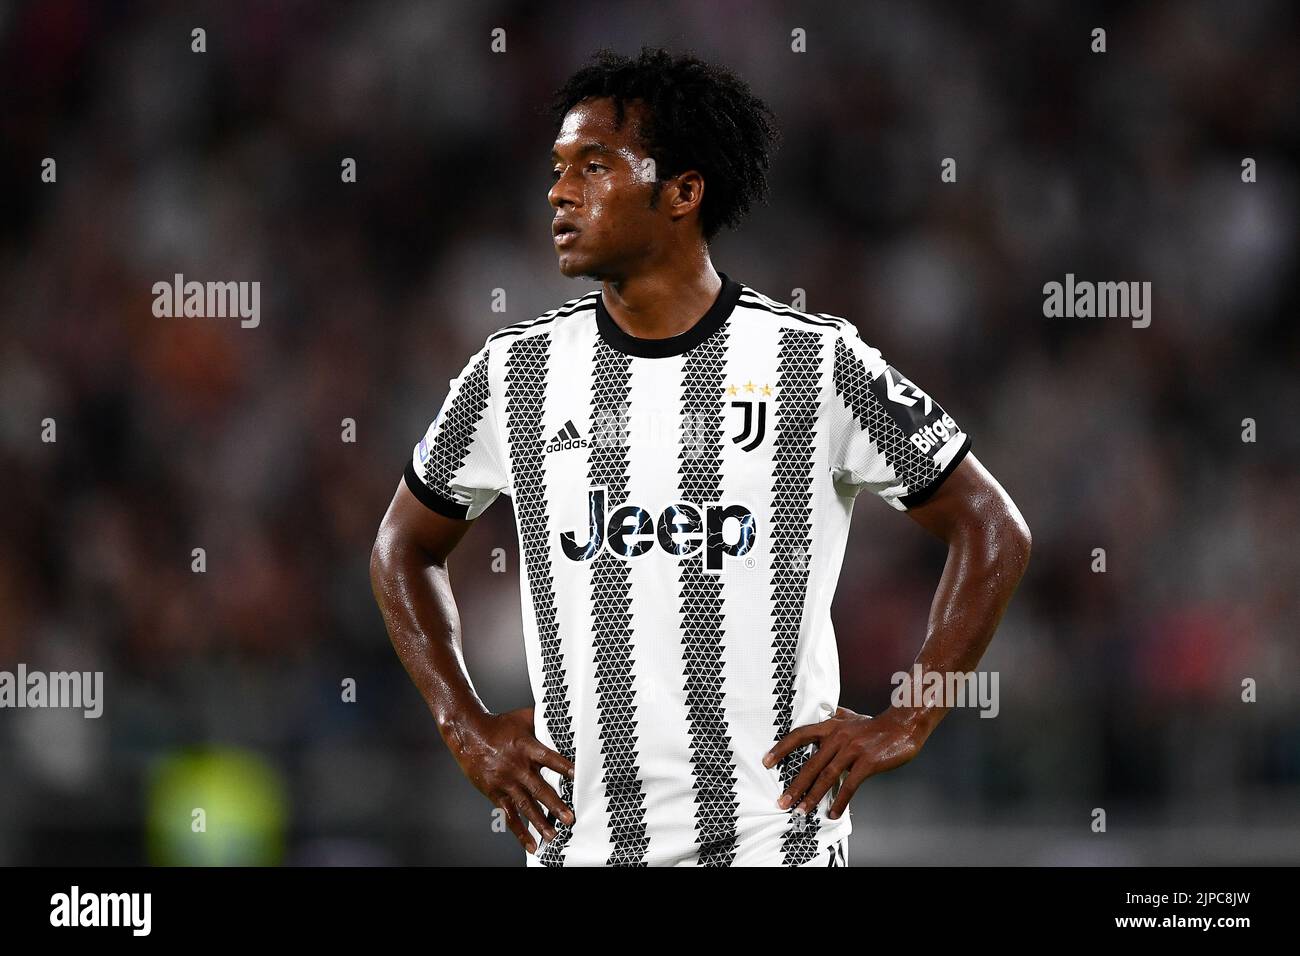 Turin, Italy. 15 August 2022. Juan Cuadrado of Juventus FC looks on during the Serie A football match between Juventus FC and US Sassuolo. Credit: Nicolò Campo/Alamy Live News Stock Photo